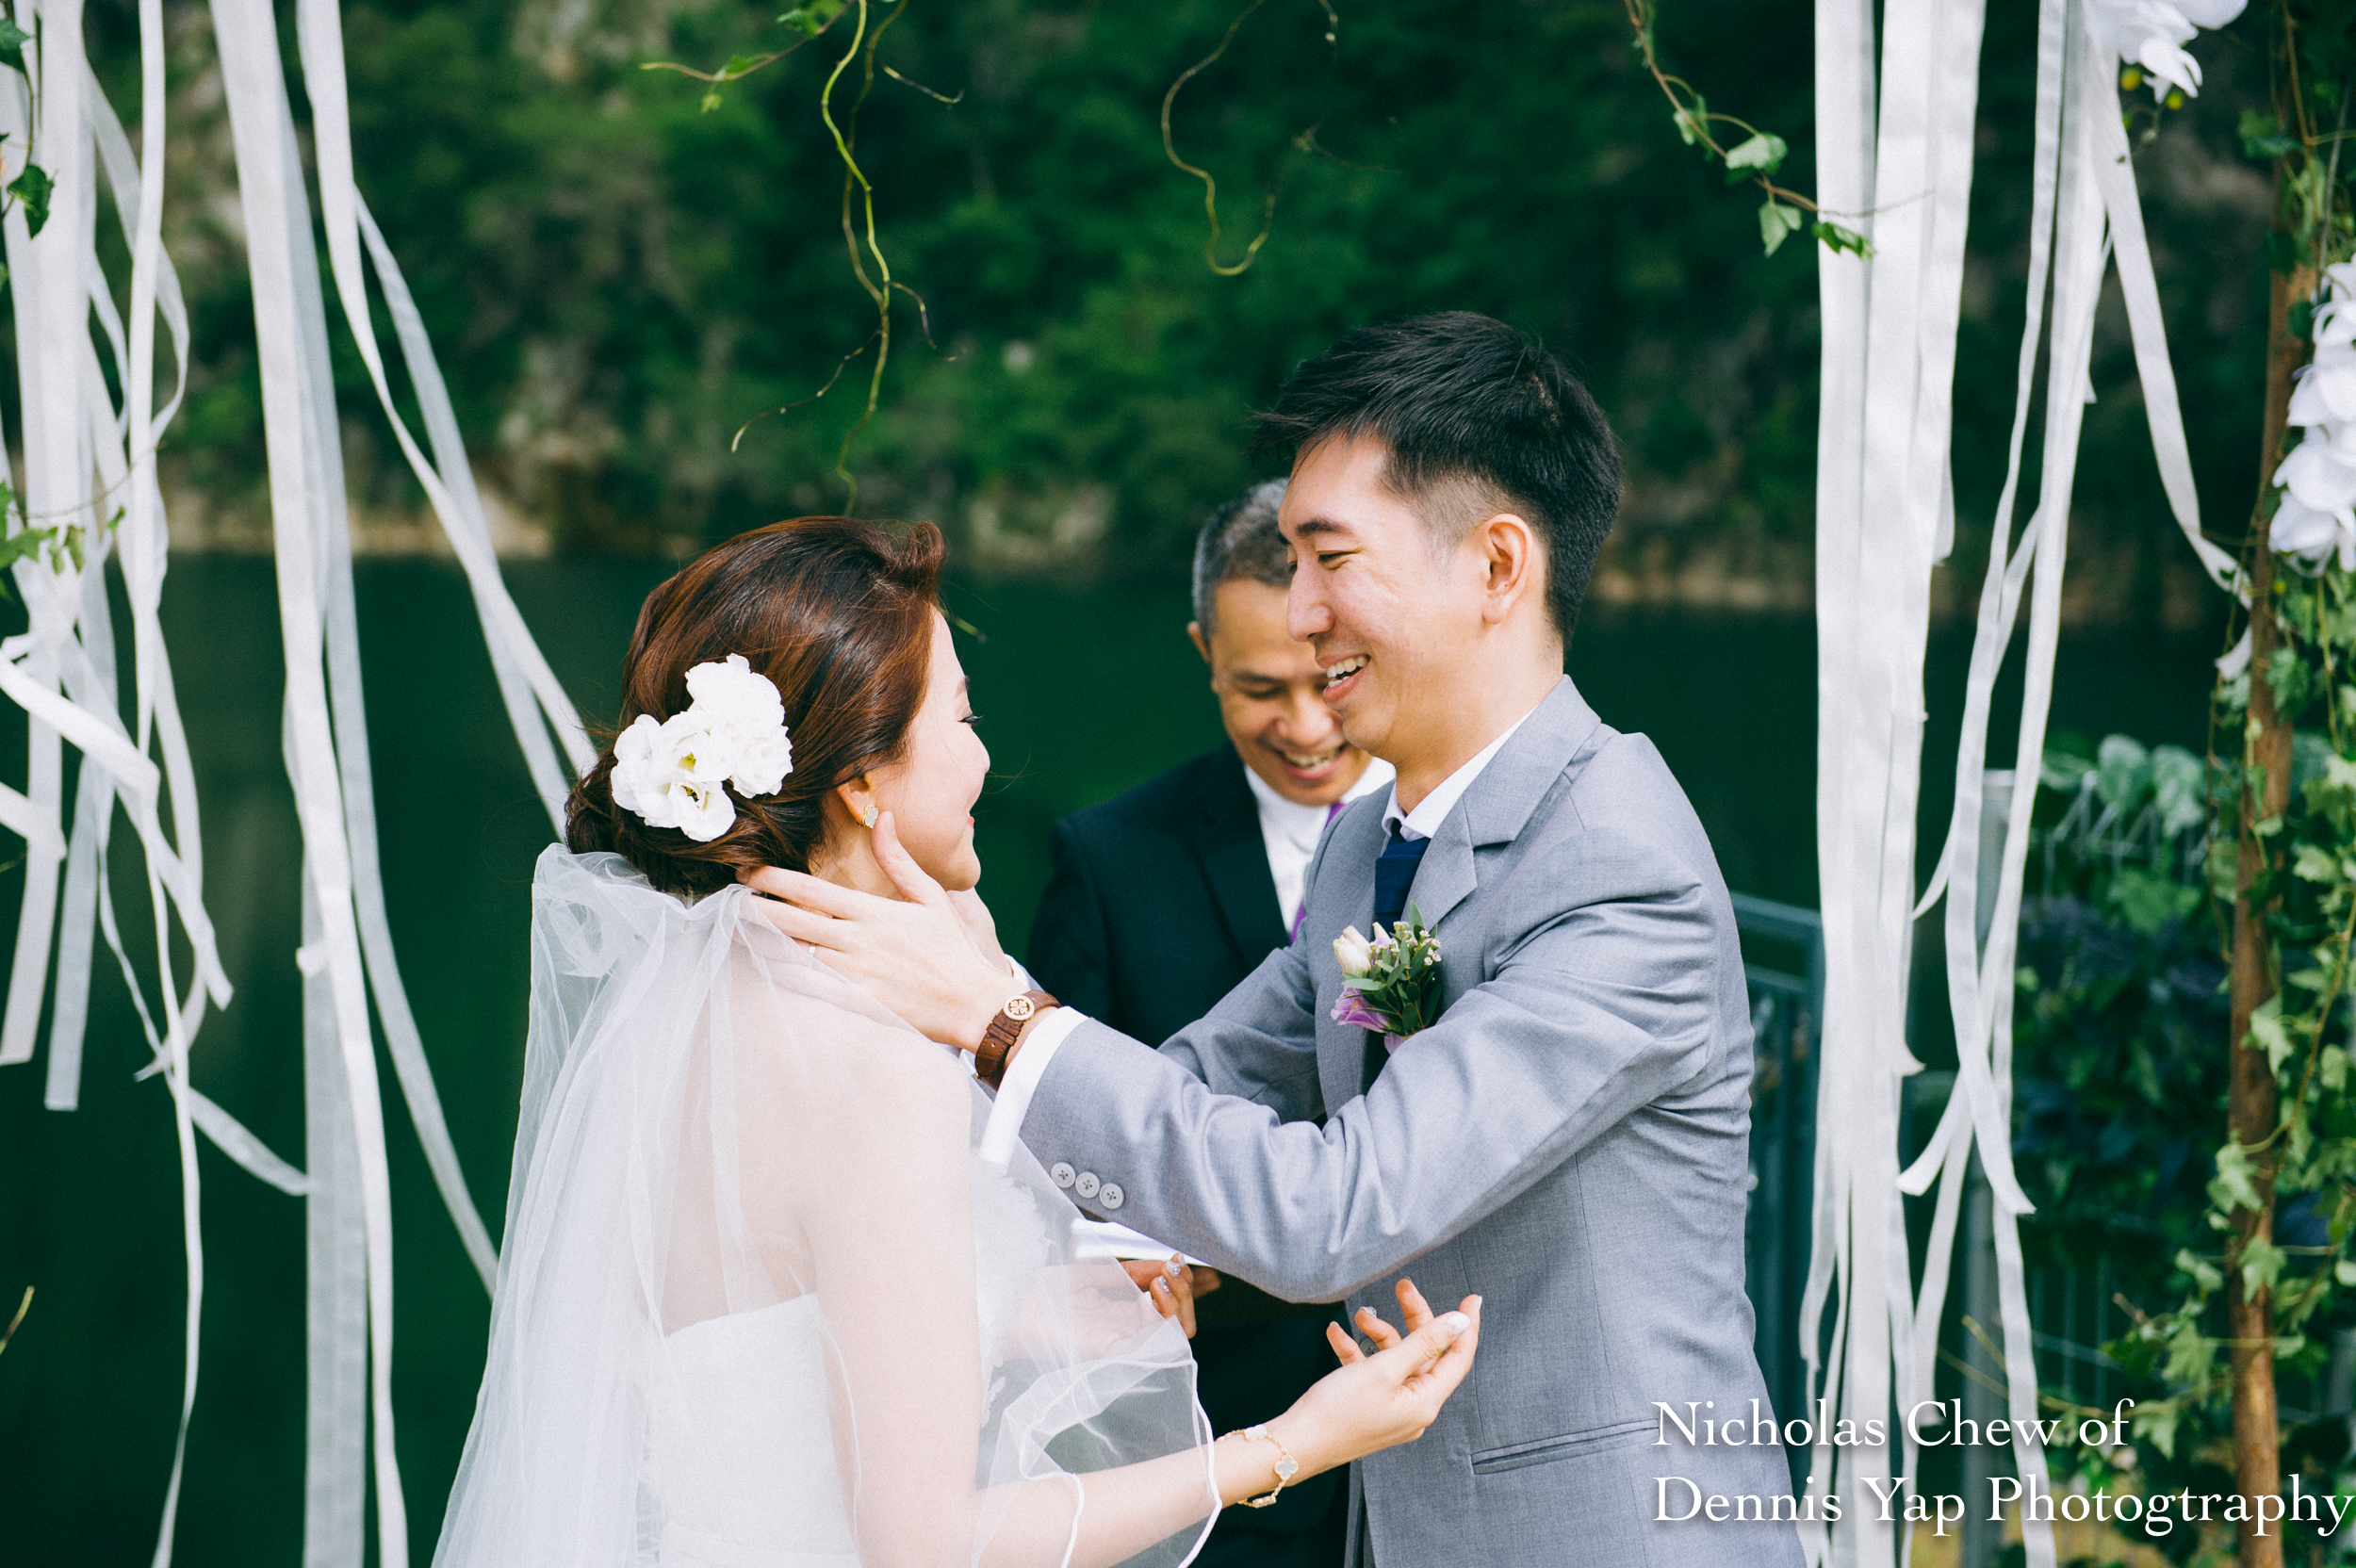 Nicholas Chew profile wedding natural candid moments chinese traditional church garden of dennis yap photography003Nicholas Profile-6.jpg